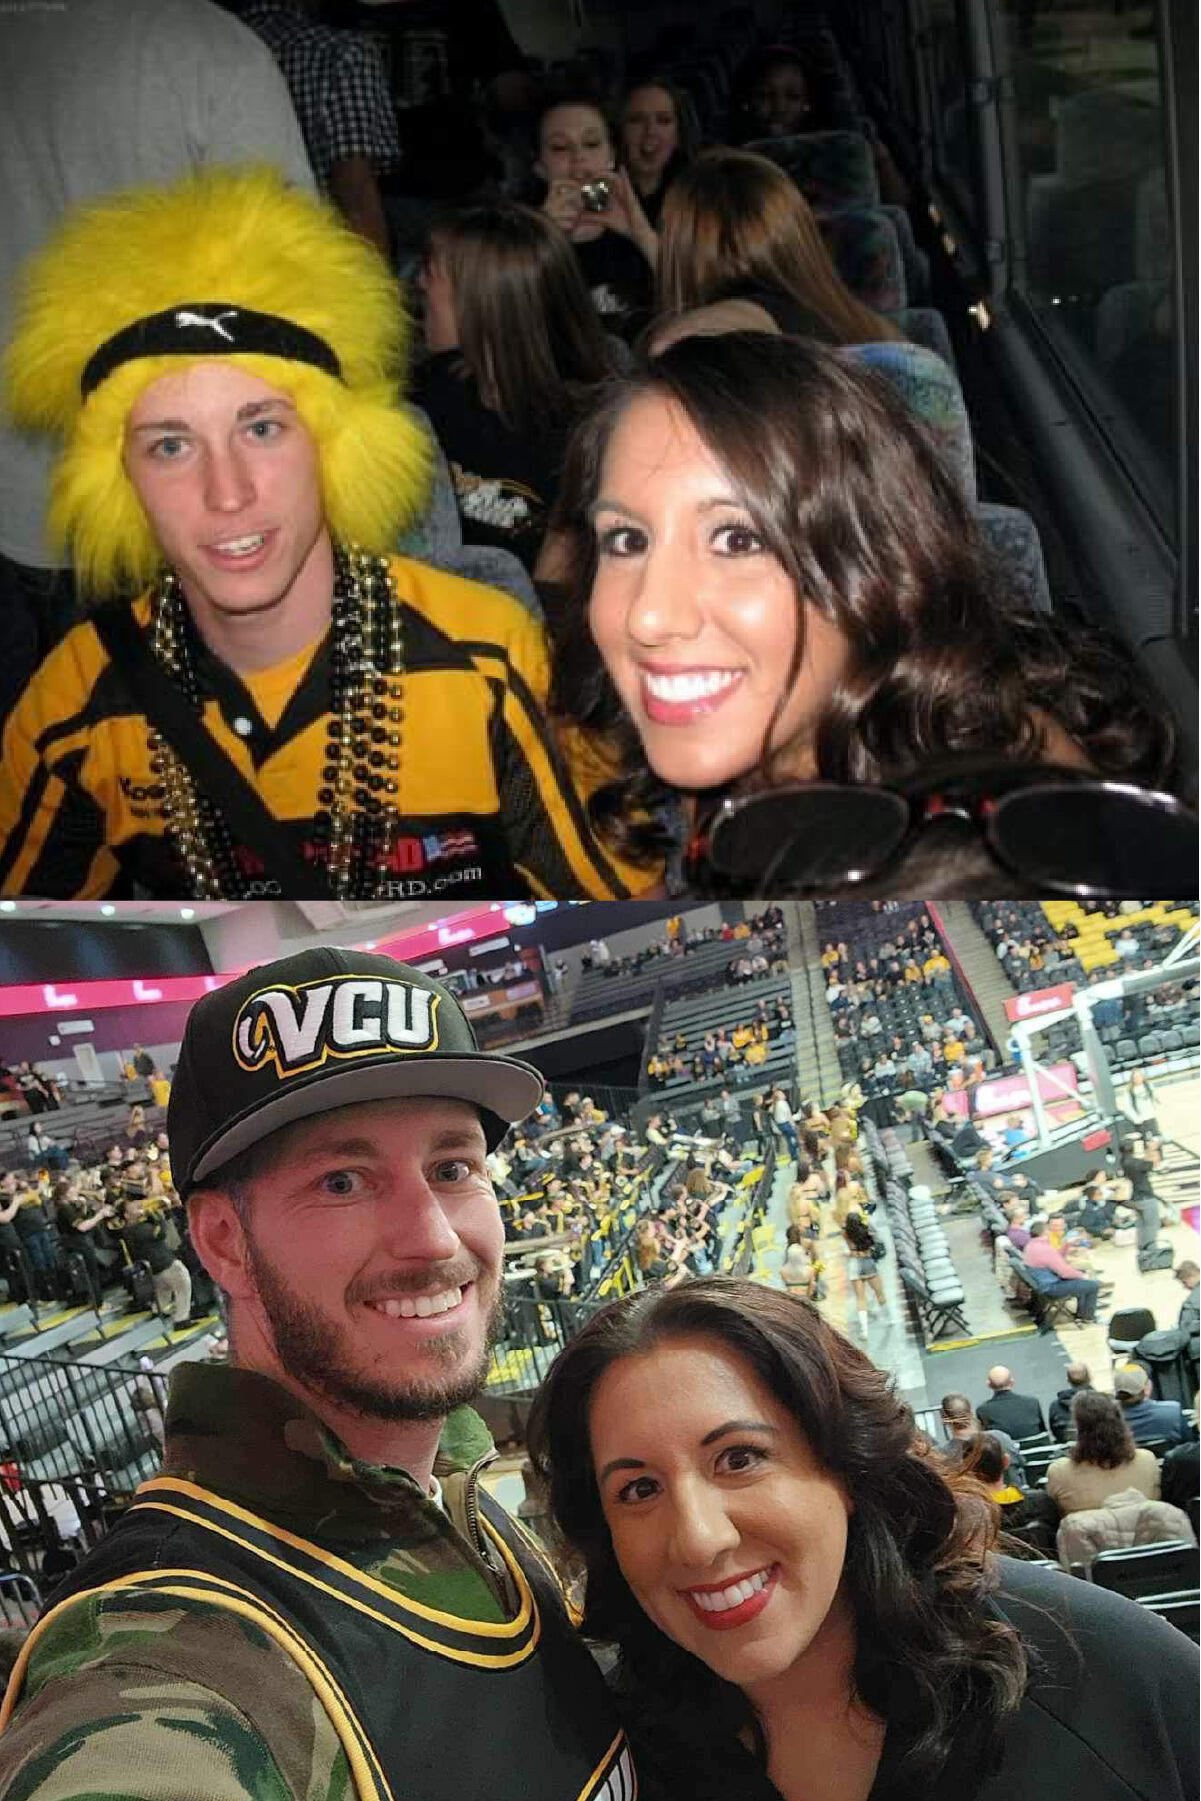 On the top is a photo of a man and a woman at a basketball game. On the bottom is an image of the same people but older